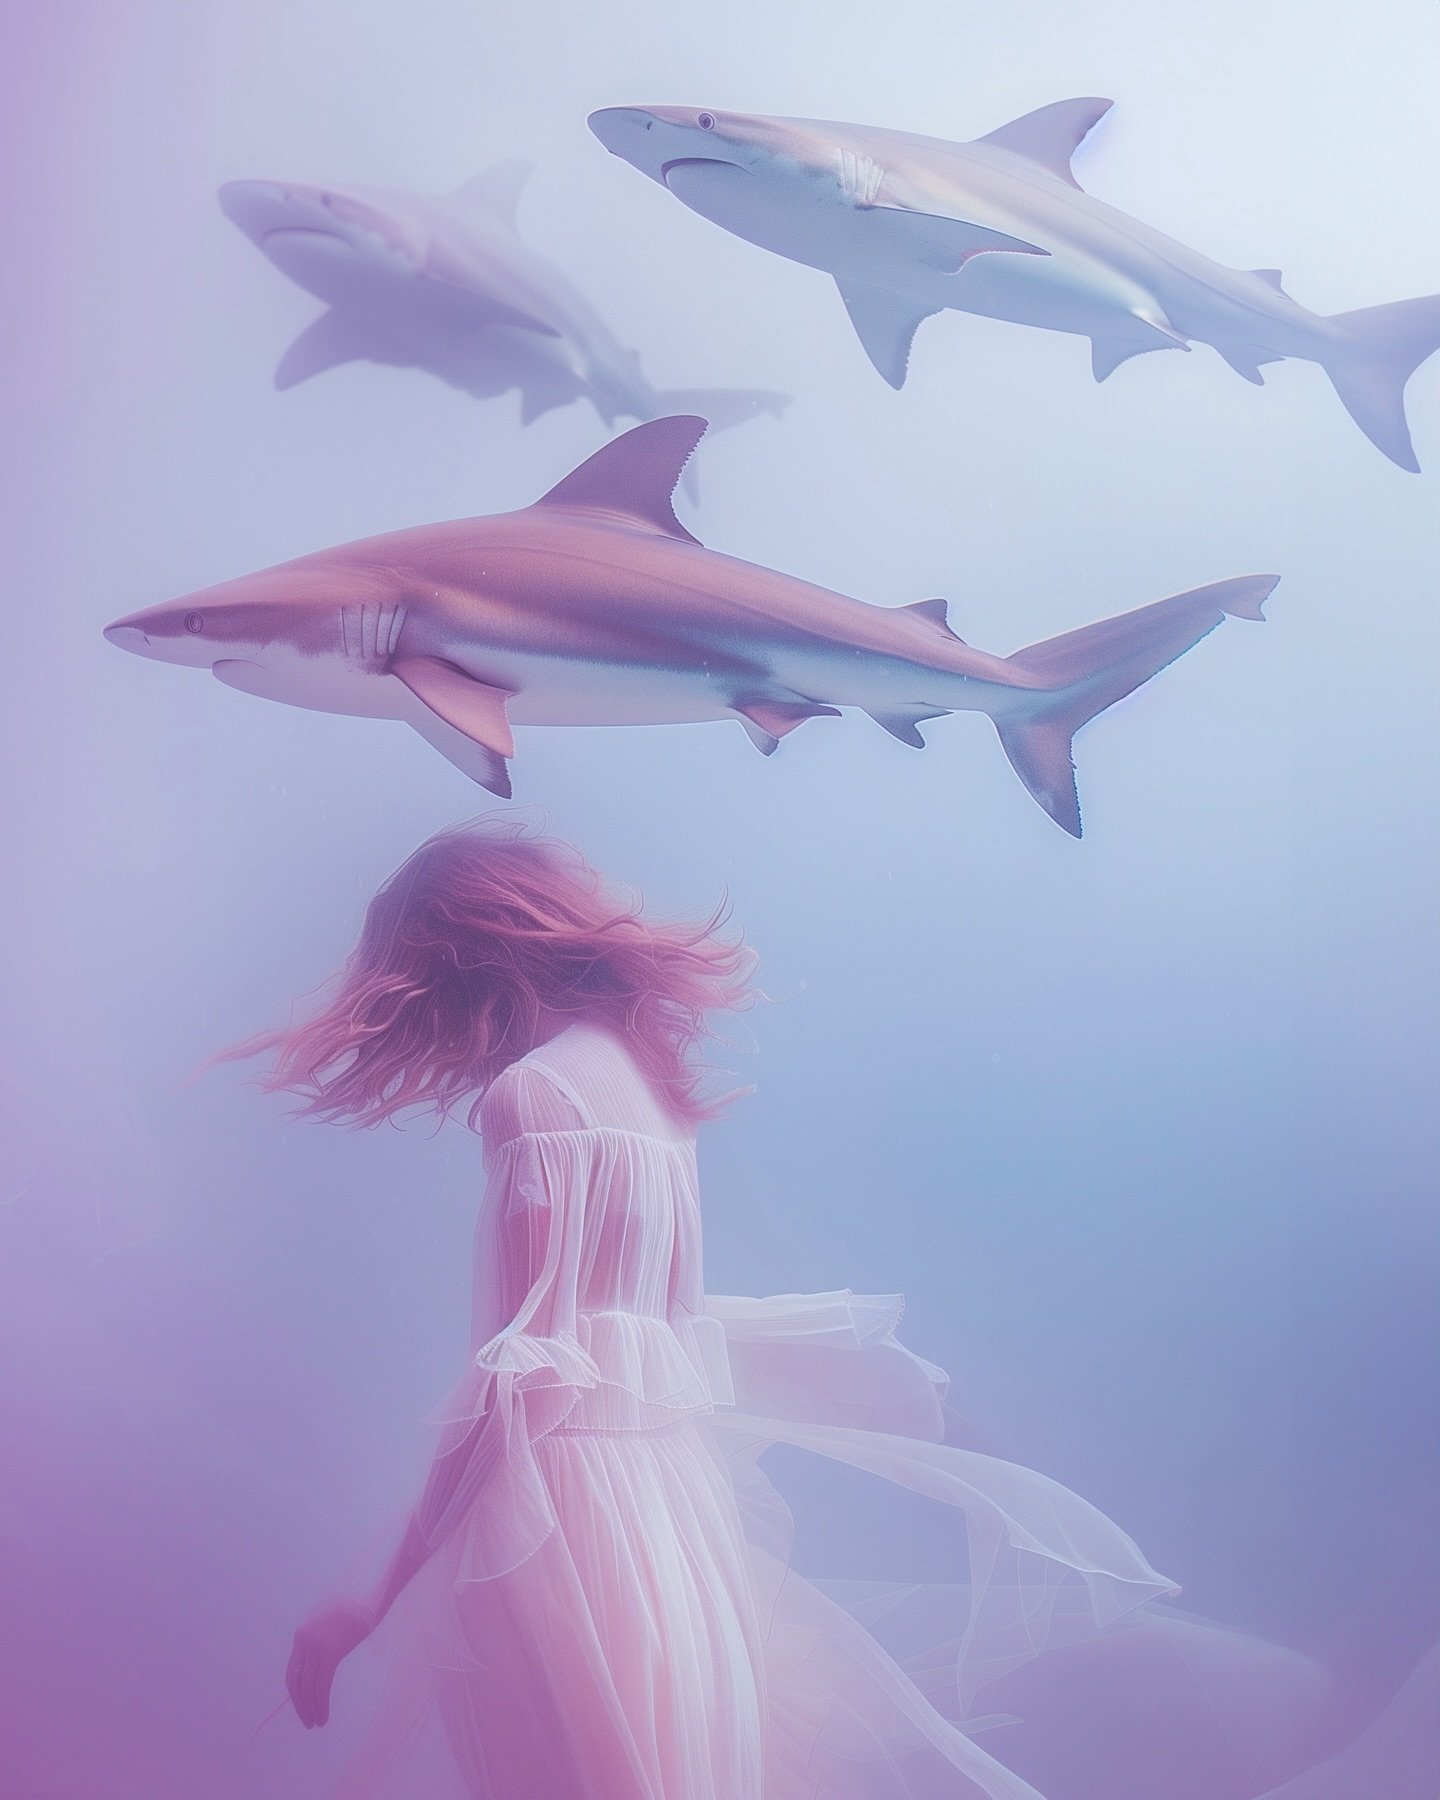 Some dreams are just about surviving.
.
.

#surrealism #sharkweek